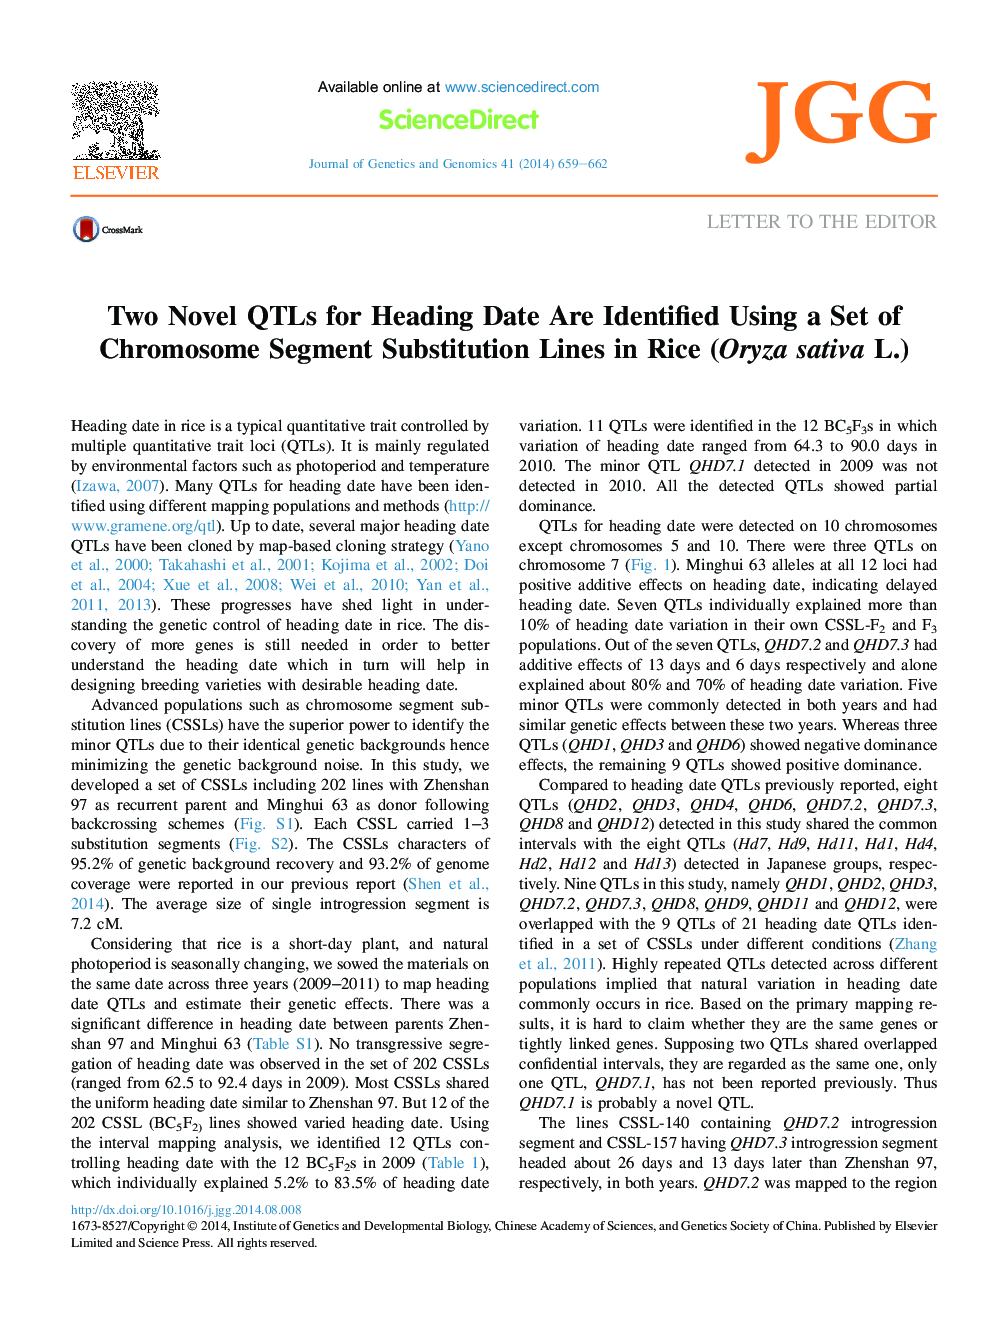 Two Novel QTLs for Heading Date Are Identified Using a Set of Chromosome Segment Substitution Lines in Rice (Oryza sativa L.)